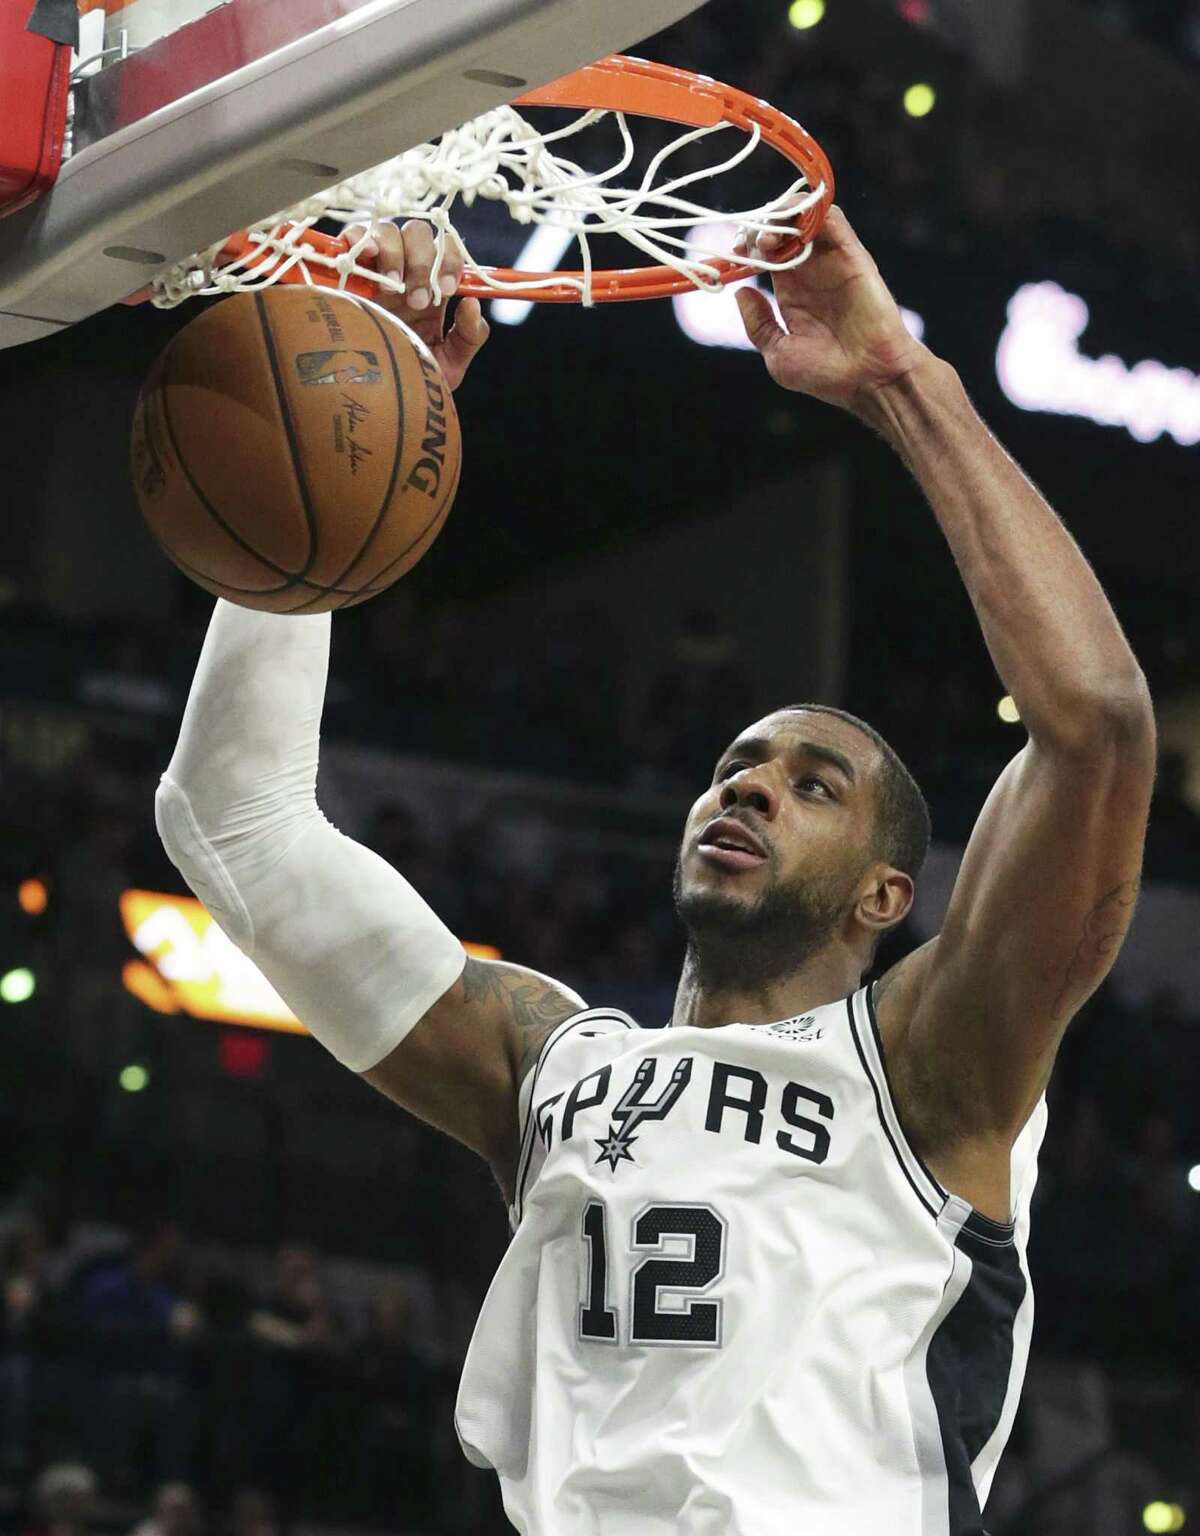 LaMarcus Aldridge jams one down as the Spurs host Oklahoma at the AT&T Center on January 10, 2019.